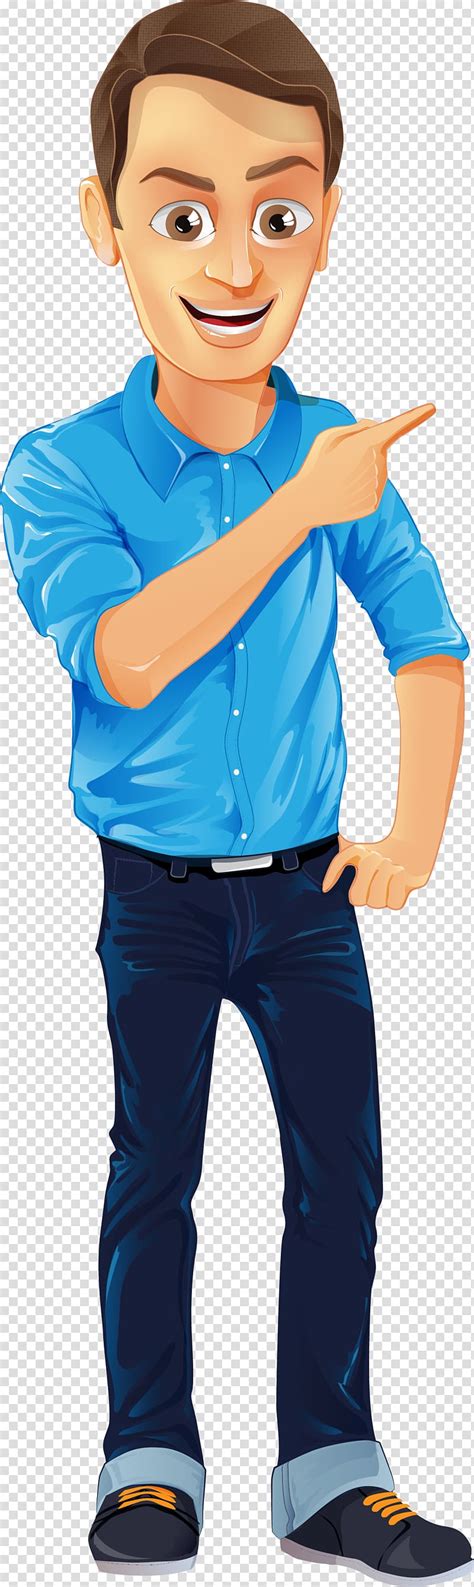 Cartoon Character Male Business People Brown Haired Male Character Transparent Background Png